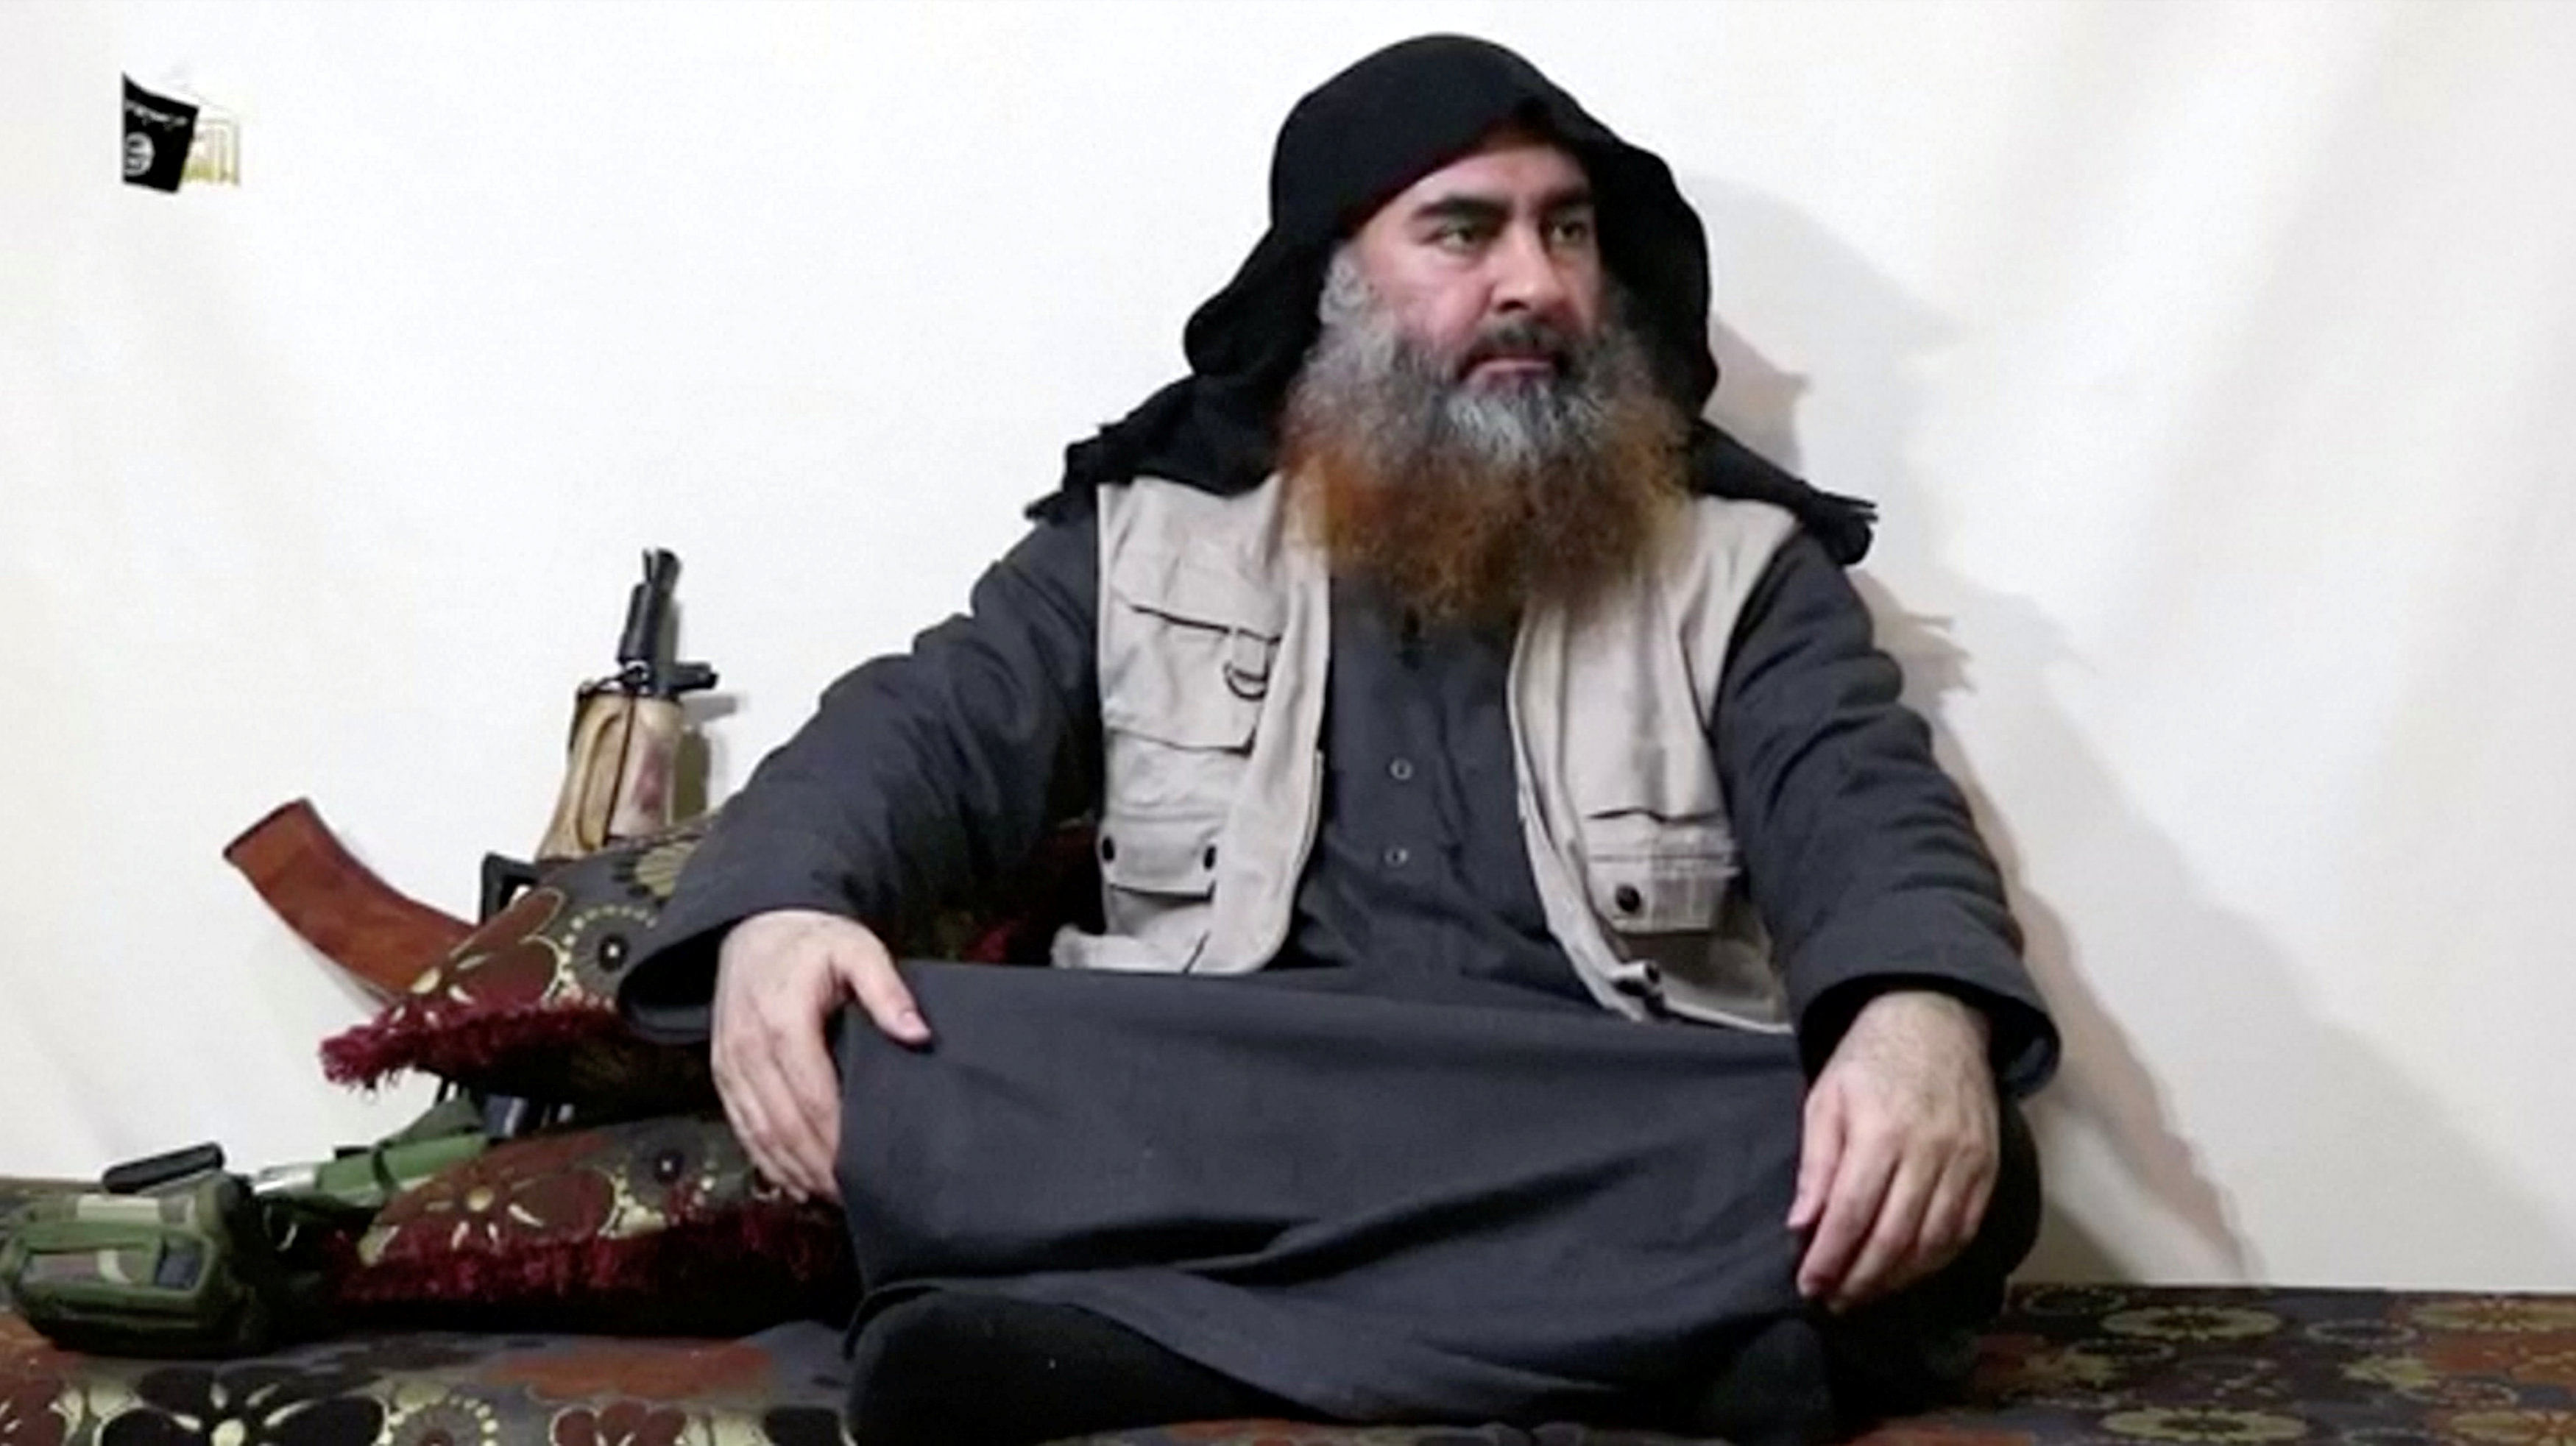 A bearded man with Islamic State leader Abu Bakr al-Baghdadi's appearance speaks in this screen grab taken from video released. (Reuters Photo)